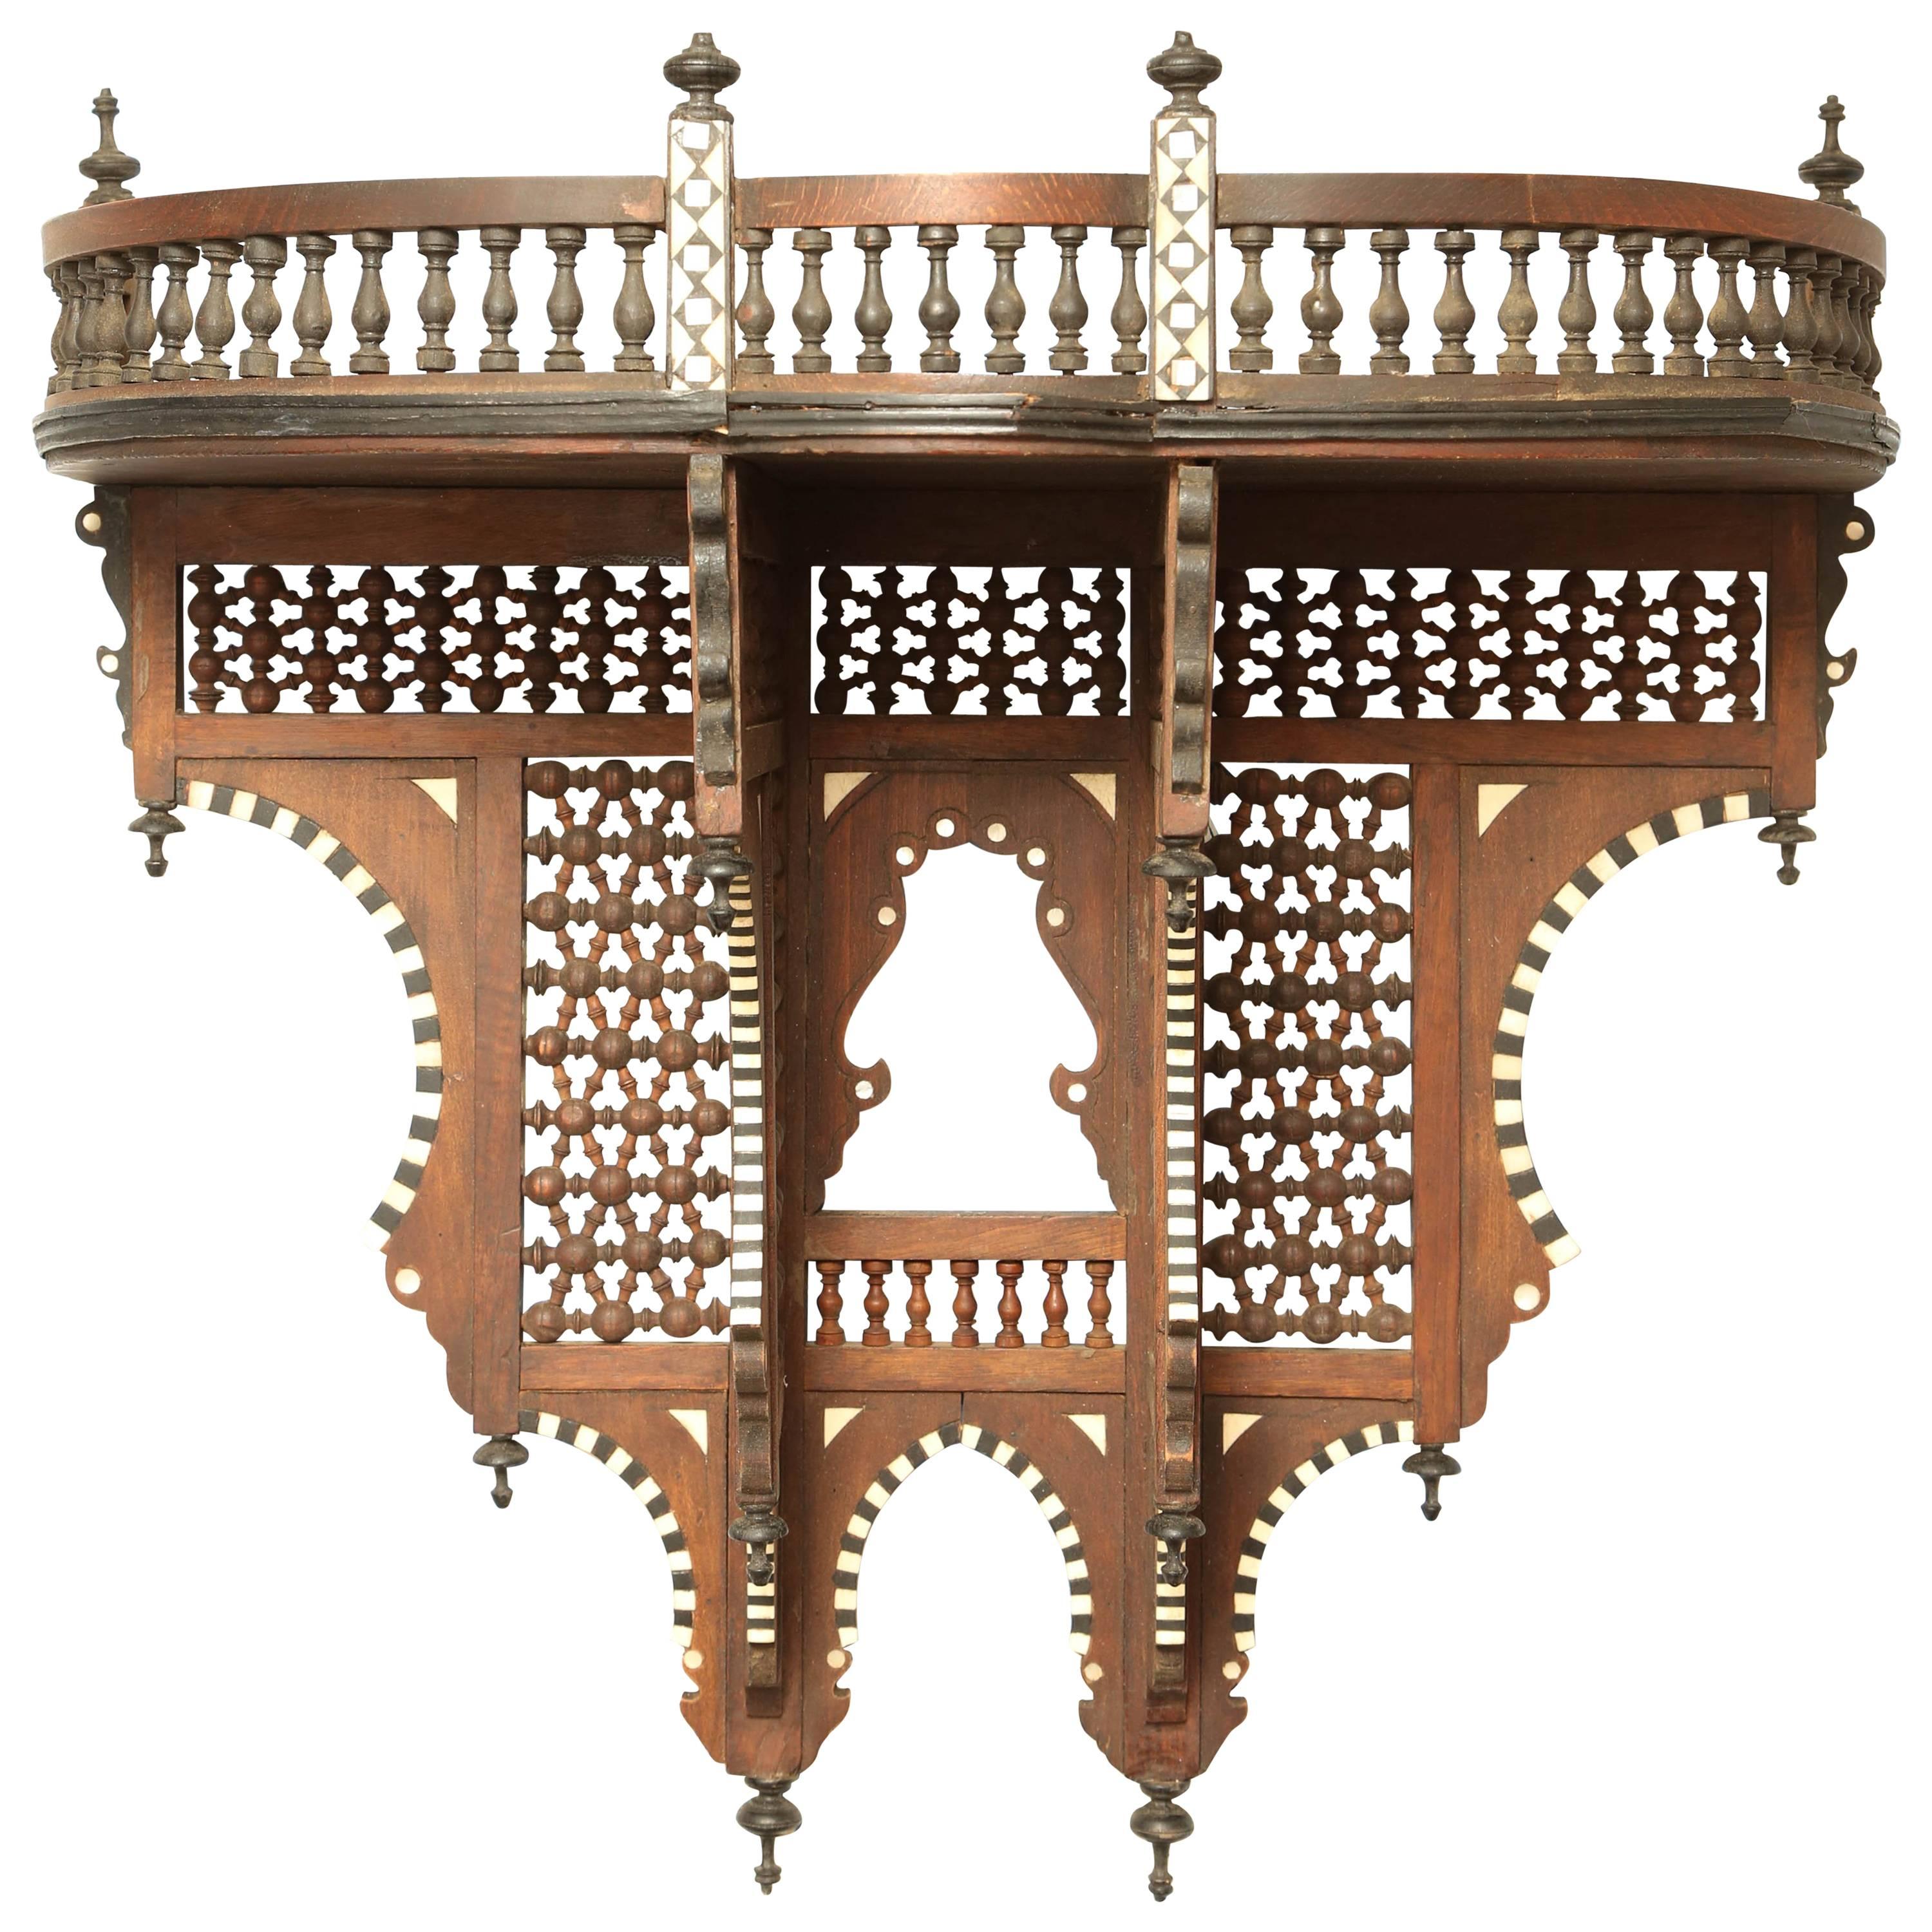 Superb Moroccan Carved Inlaid Hanging Wall Shelf